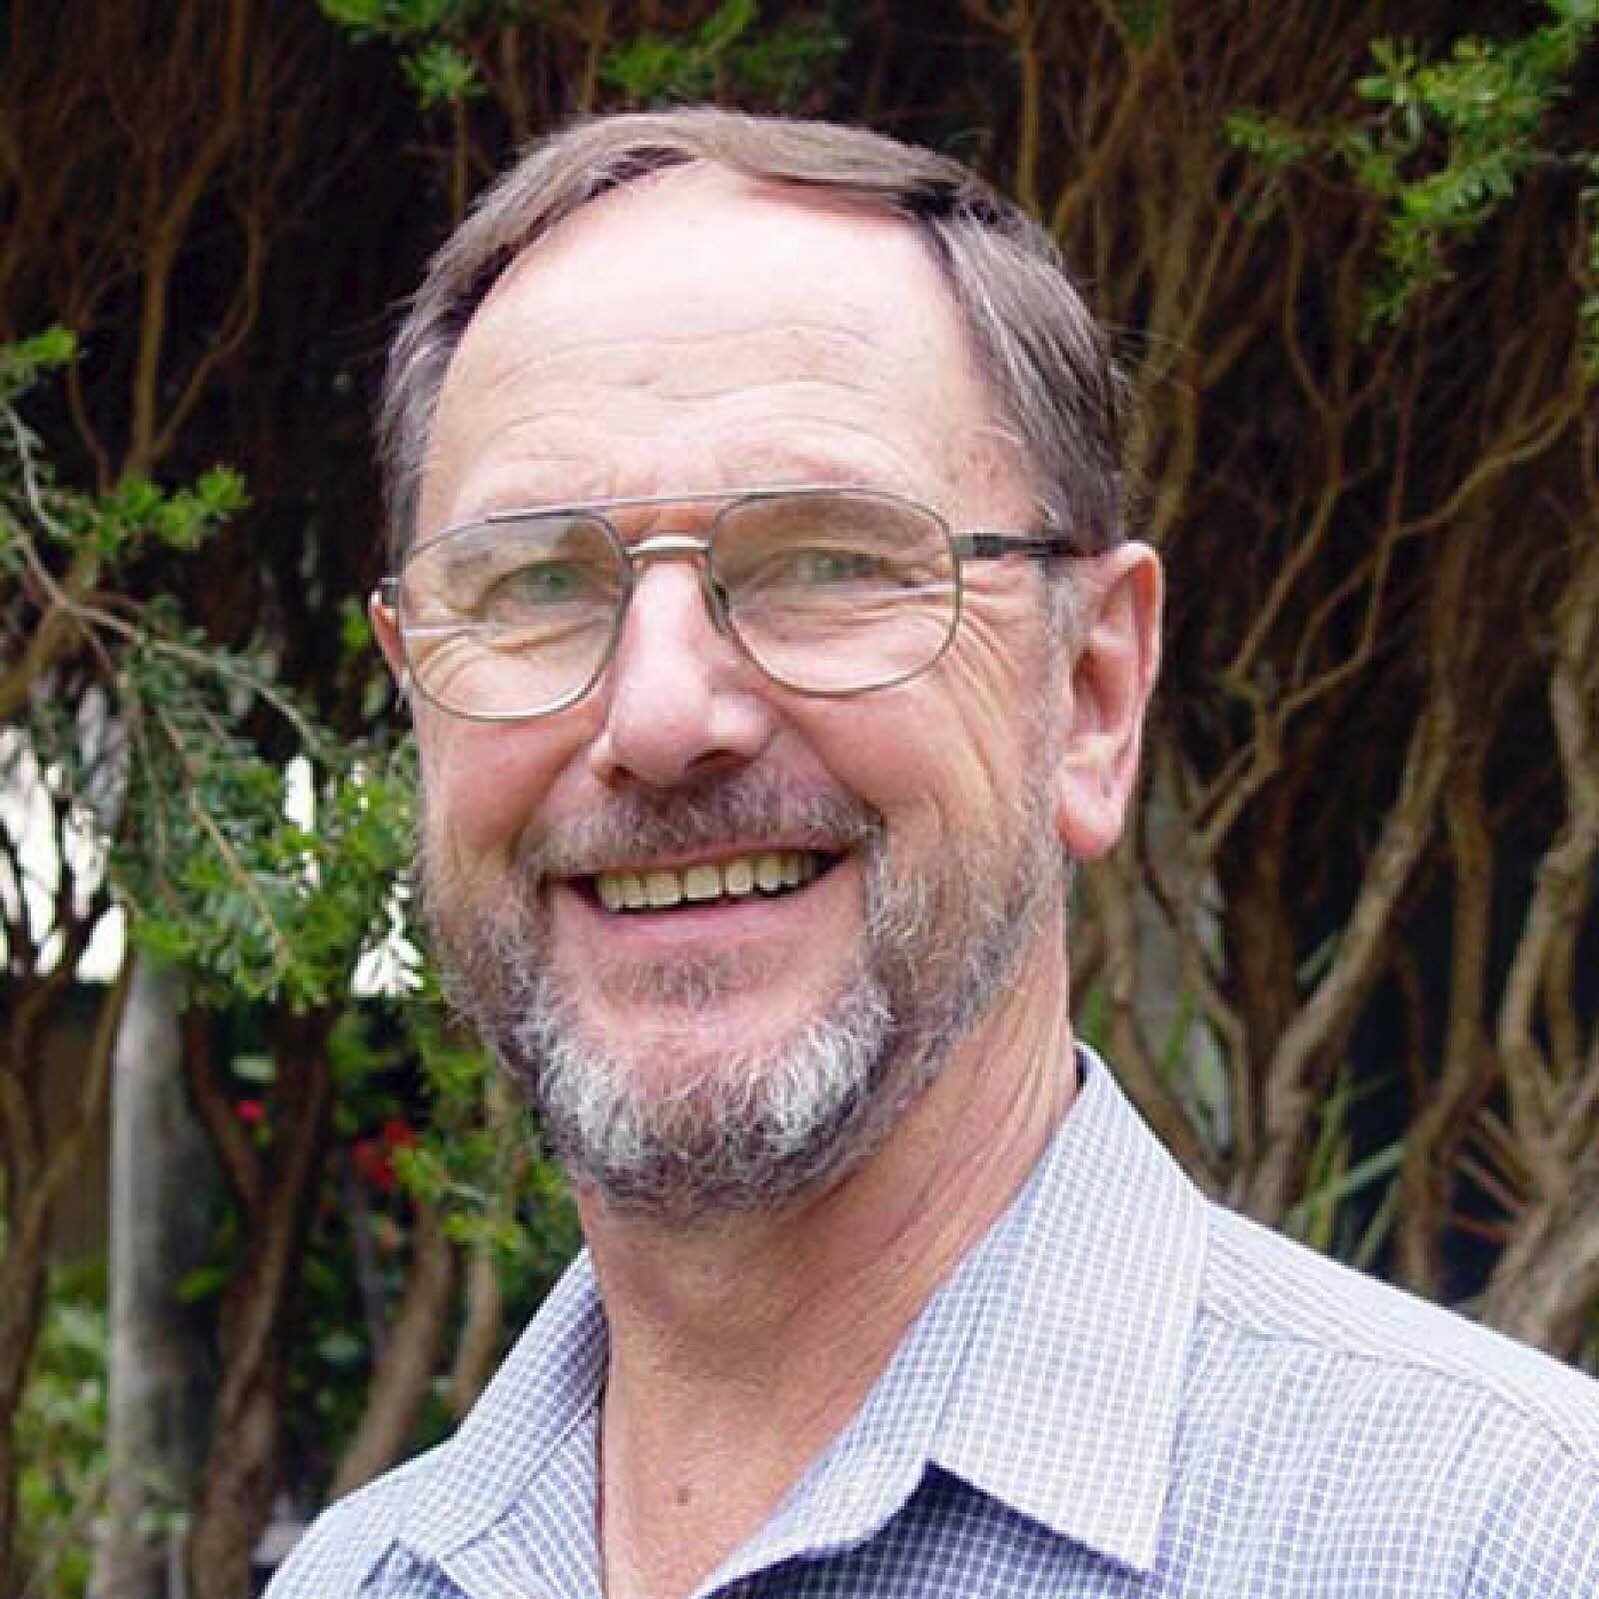 Episode 223 : John Colwill - For the Love of Trees 🌳
One of Australia&rsquo;s most respected Plantsman, John Colwill was awarded the Order of Australia for his outstanding contribution to the horticultural industry. John chats with Deryn sharing his